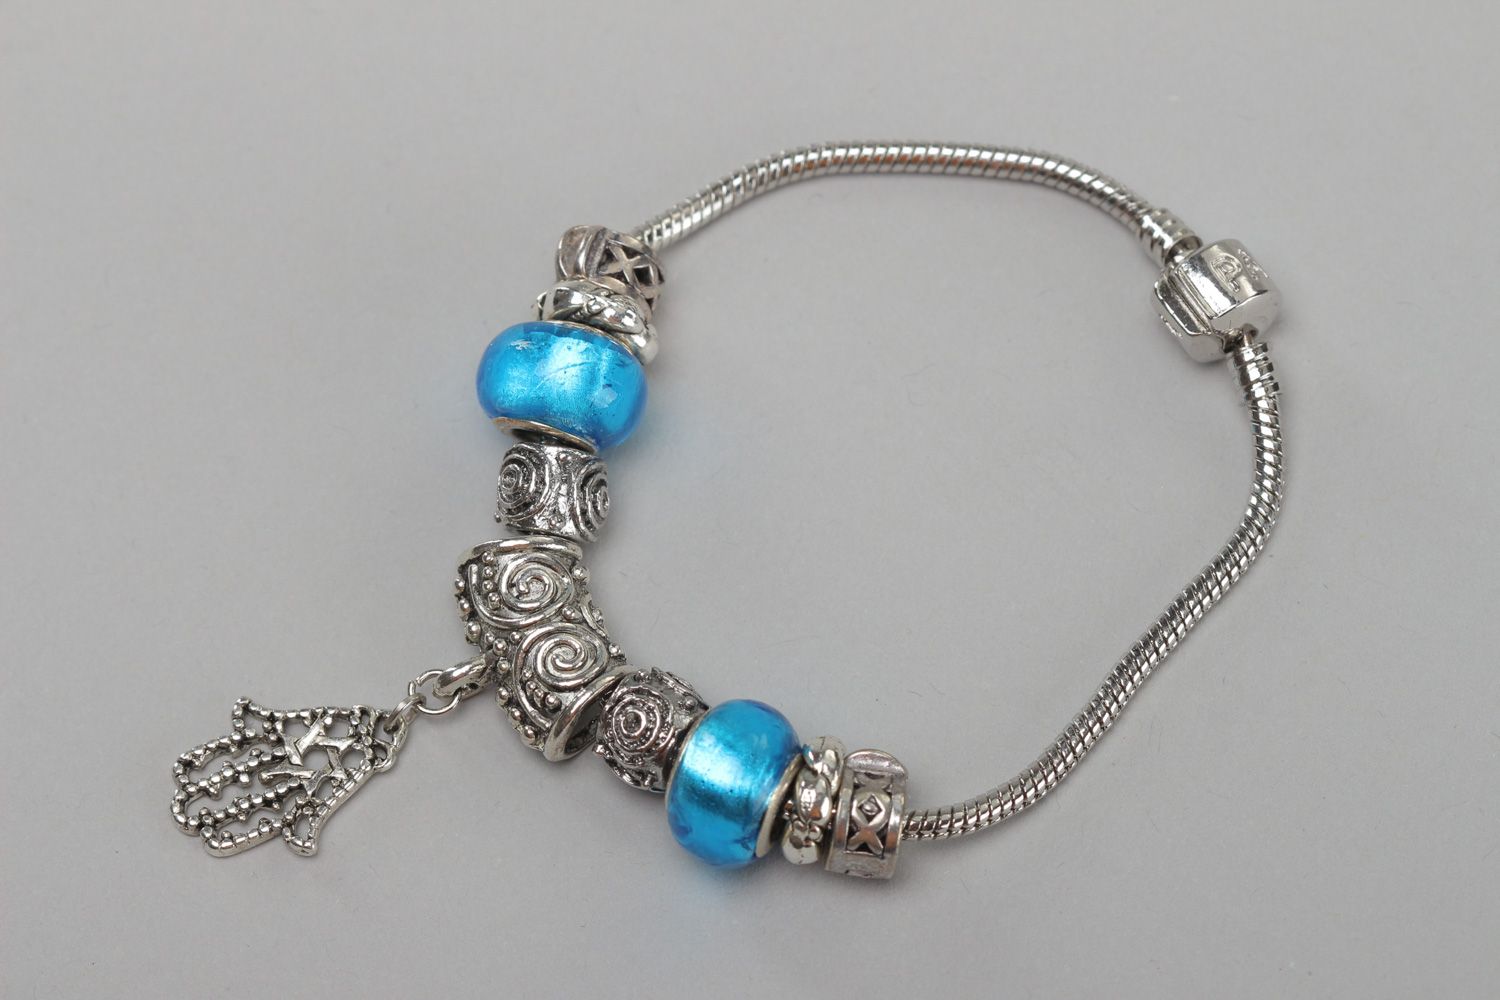 Thin handmade wrist bracelet with blue glass beads and metal charm for women photo 2